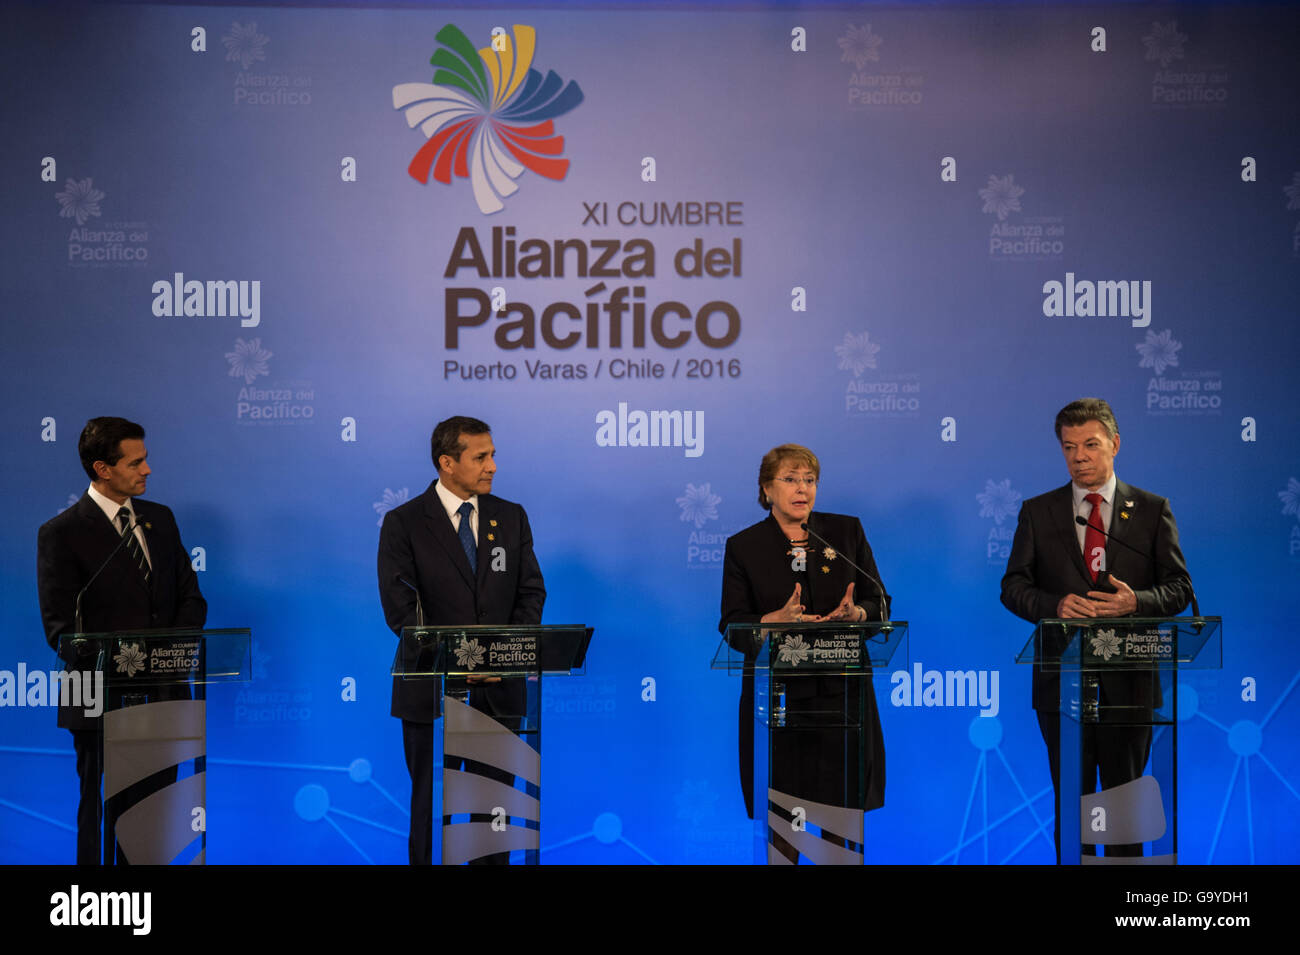 Puerto Varas, Chile. 1st July, 2016. (L-R) Mexico's President Enrique Pena Nieto, Peru's President Ollanta Humala, Chile's President Michelle Bachelet and Colombia's President Juan Manuel Santos attend the closing ceremony of the 11th Presidential Summit of the Pacific Alliance in Puerto Varas, Chile, on July 1, 2016. The Pacific Alliance, a trade bloc uniting four Latin American nations bordering the Pacific Ocean, announced on Friday its intention to bolster trade relations with the Asia-Pacific region, especially with China. © Jorge Villegas/Xinhua/Alamy Live News Stock Photo